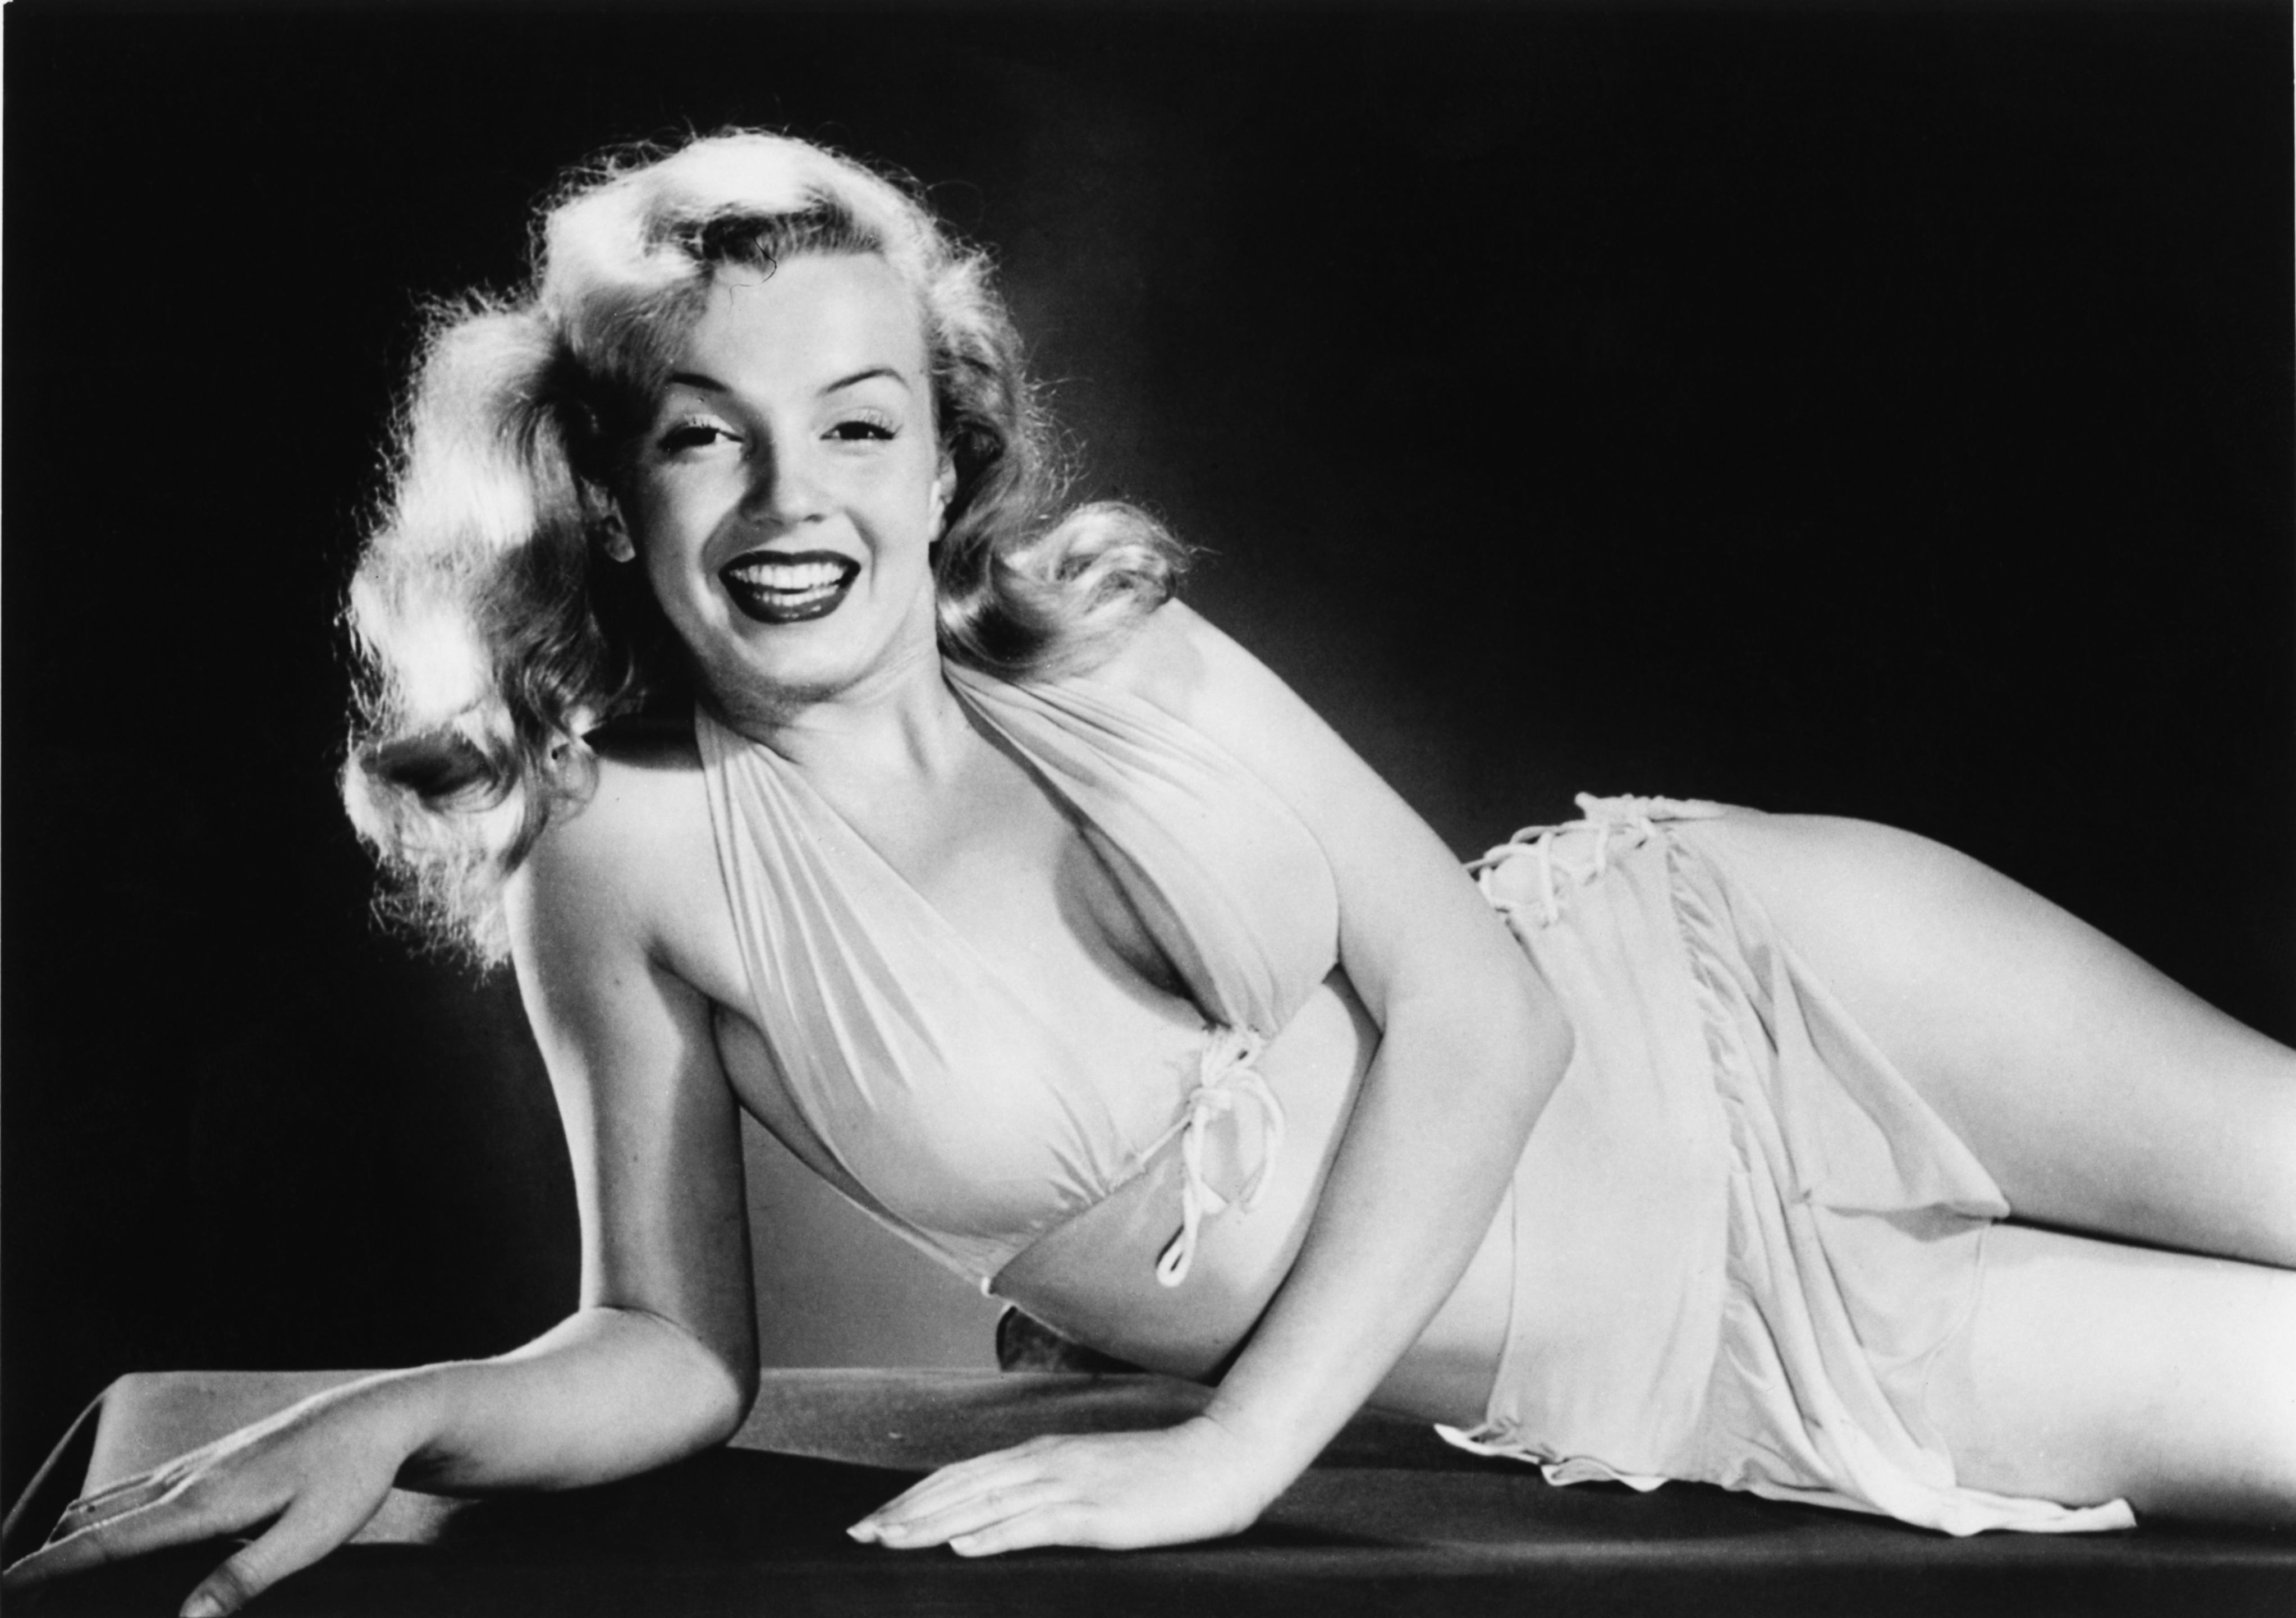 owners of marilyn monroe’s home sue los angeles for right to demolish historic property